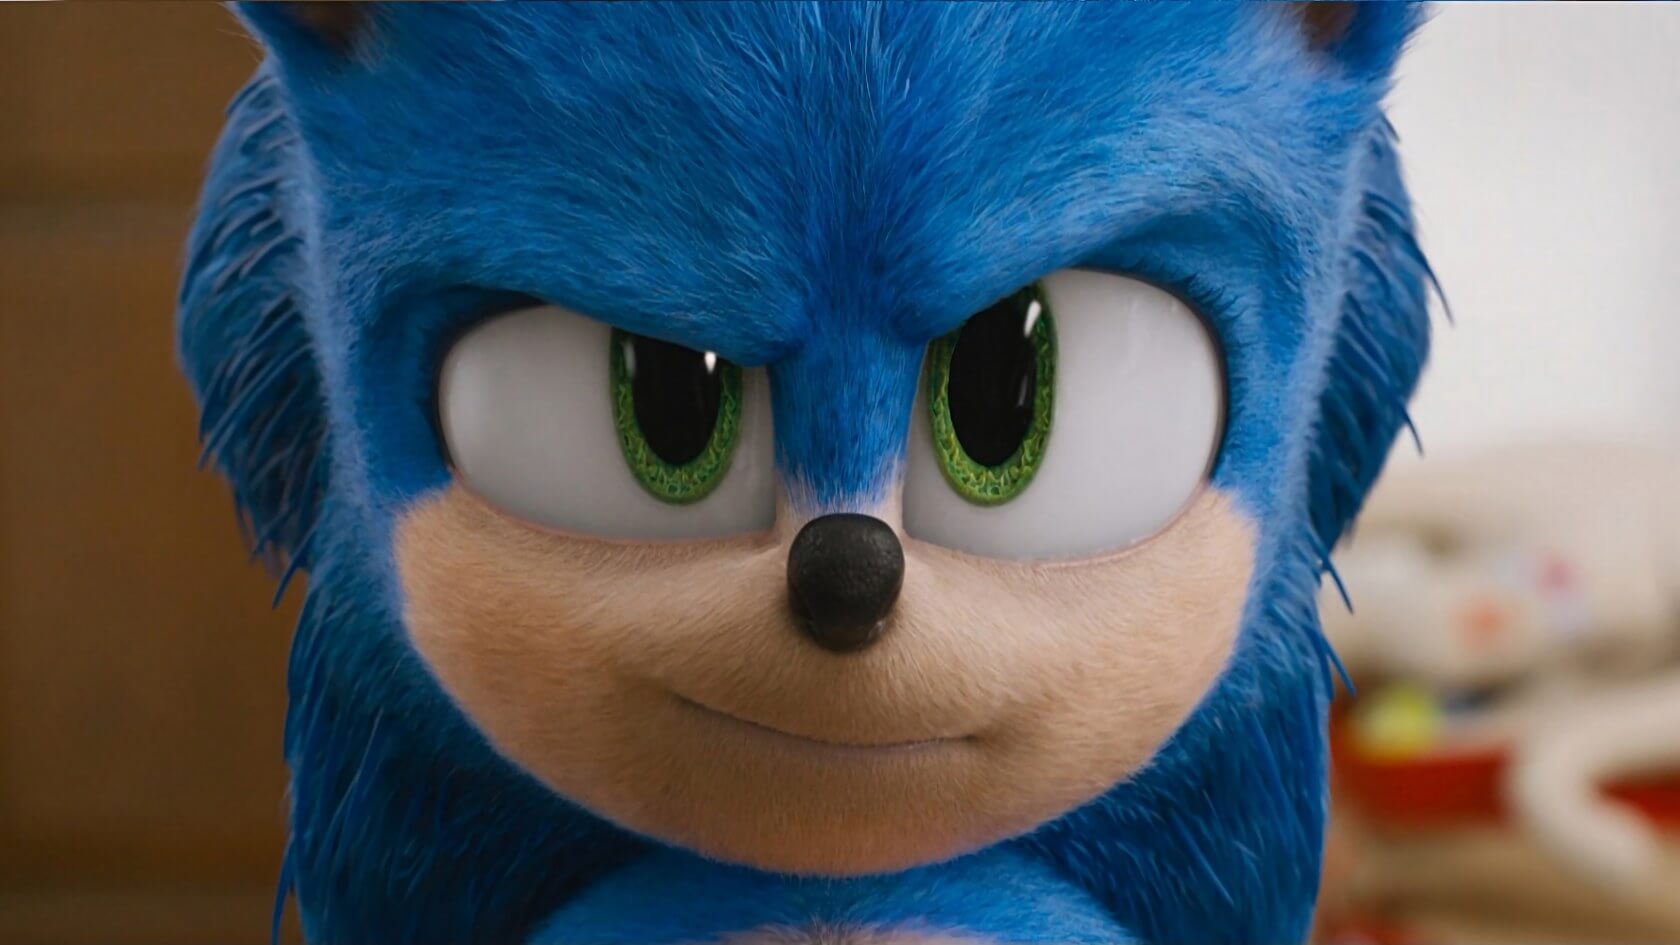 Paramount's live-action Sonic the Hedgehog film is getting a sequel